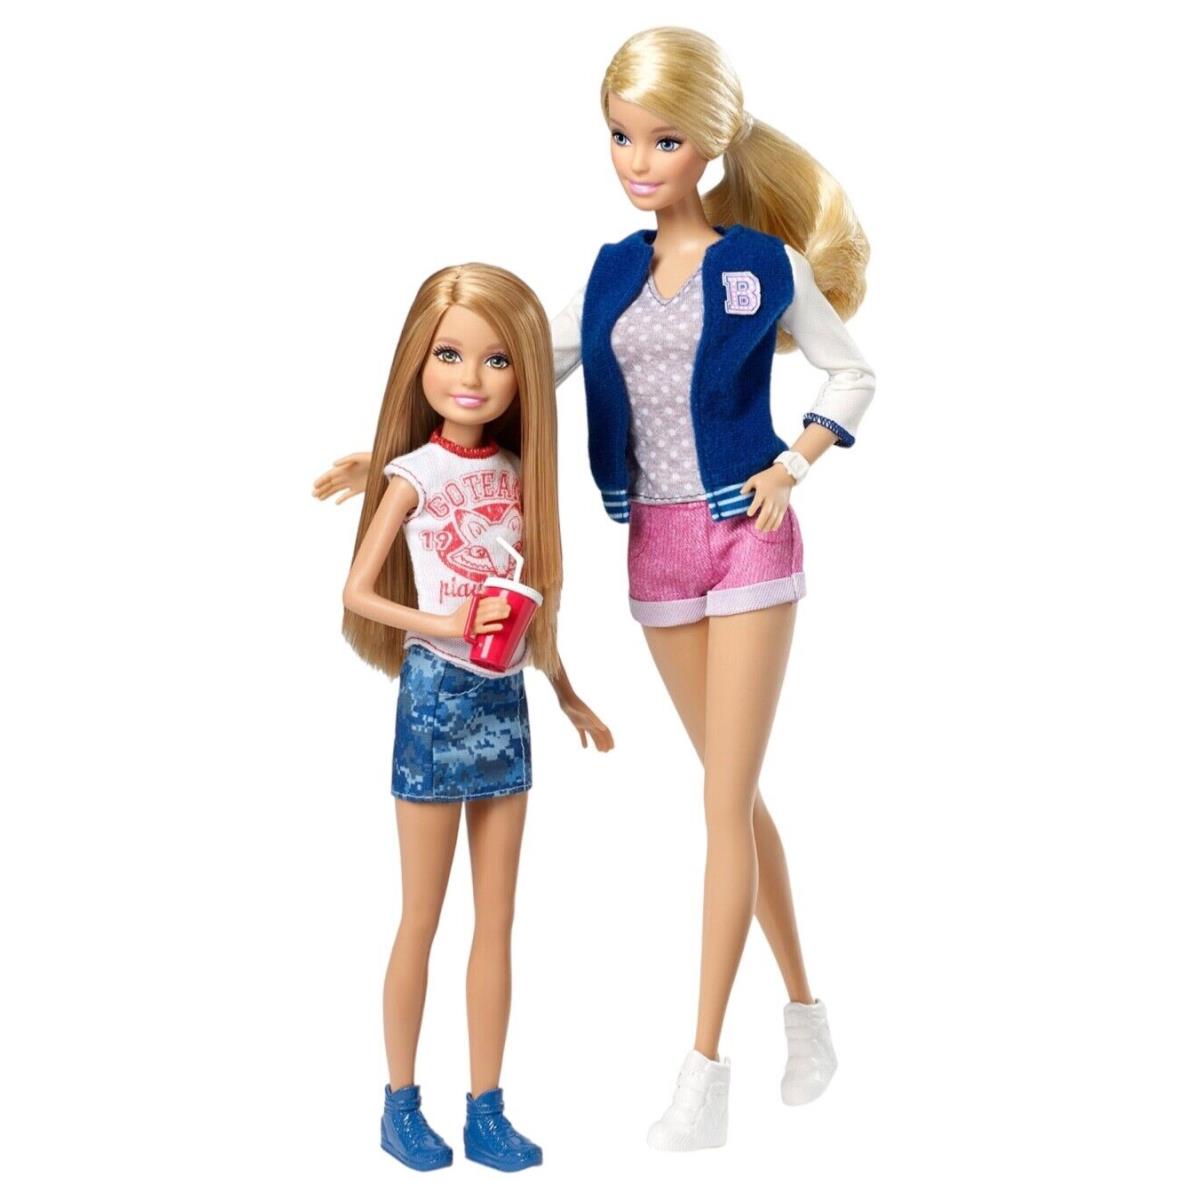 Barbie Life In The Dreamhouse Sisters Fun Day Stacie Barbie Dolls 2-Pack